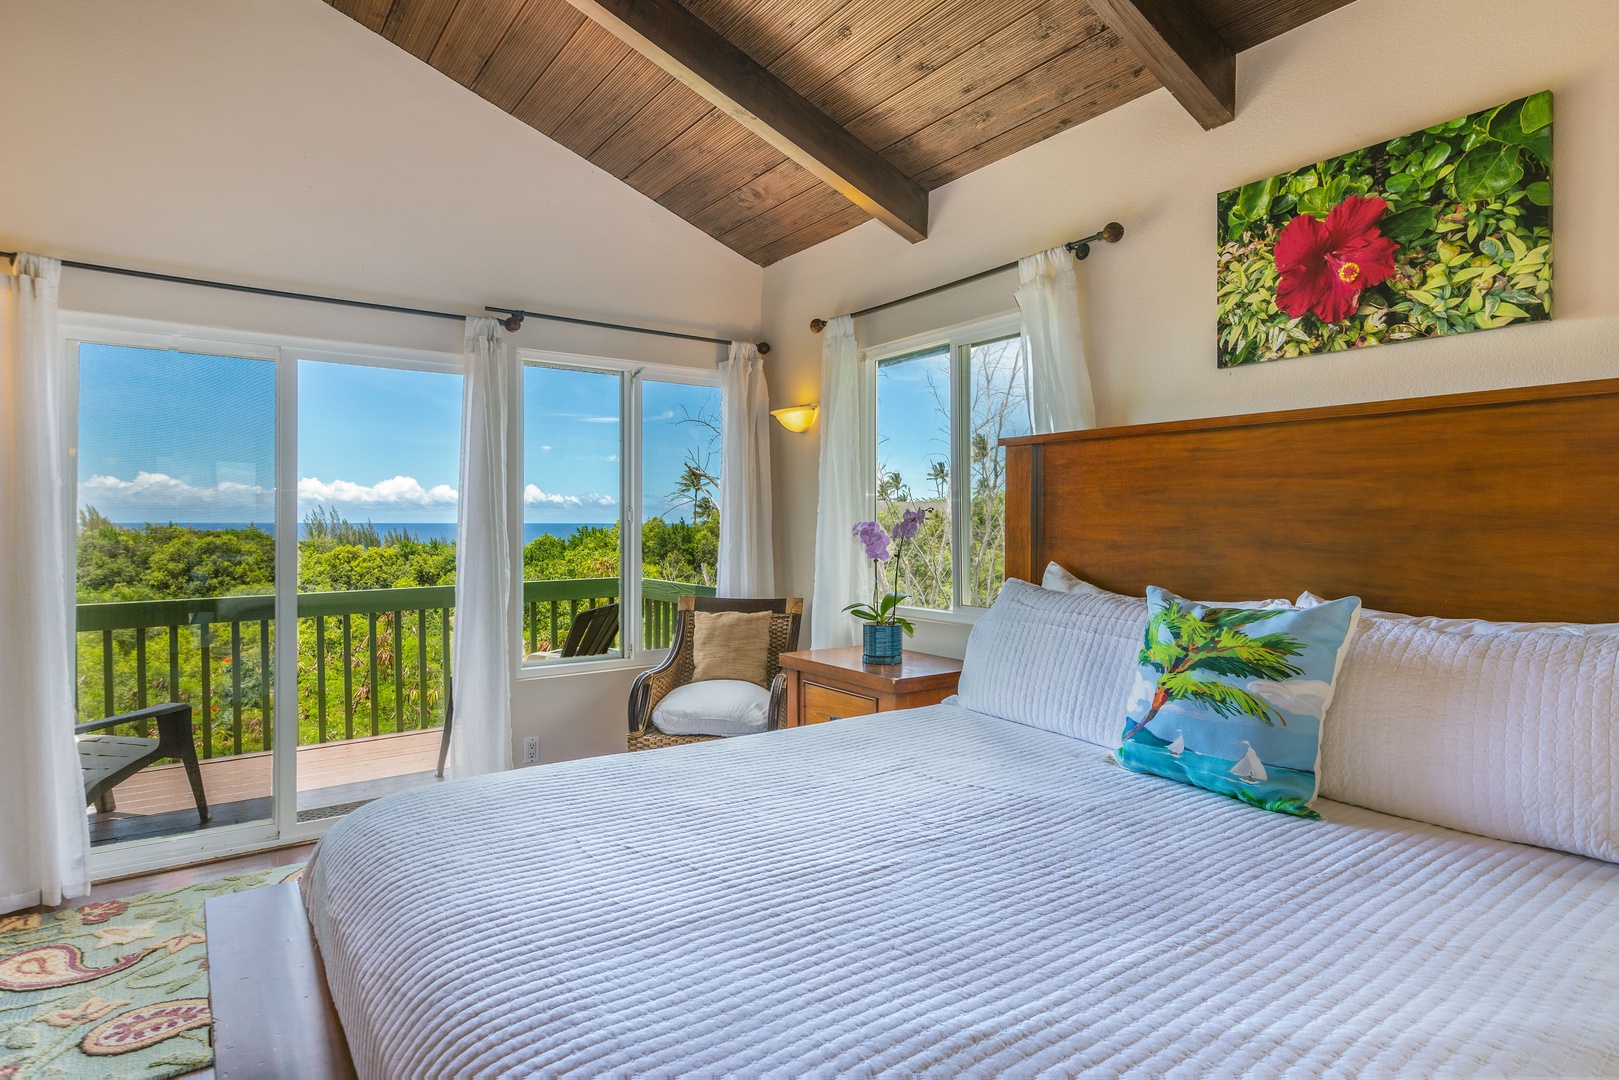 Princeville Vacation Rentals, Hale Ohia - Equipped with a king bed, ceiling fan, and ensuite bath